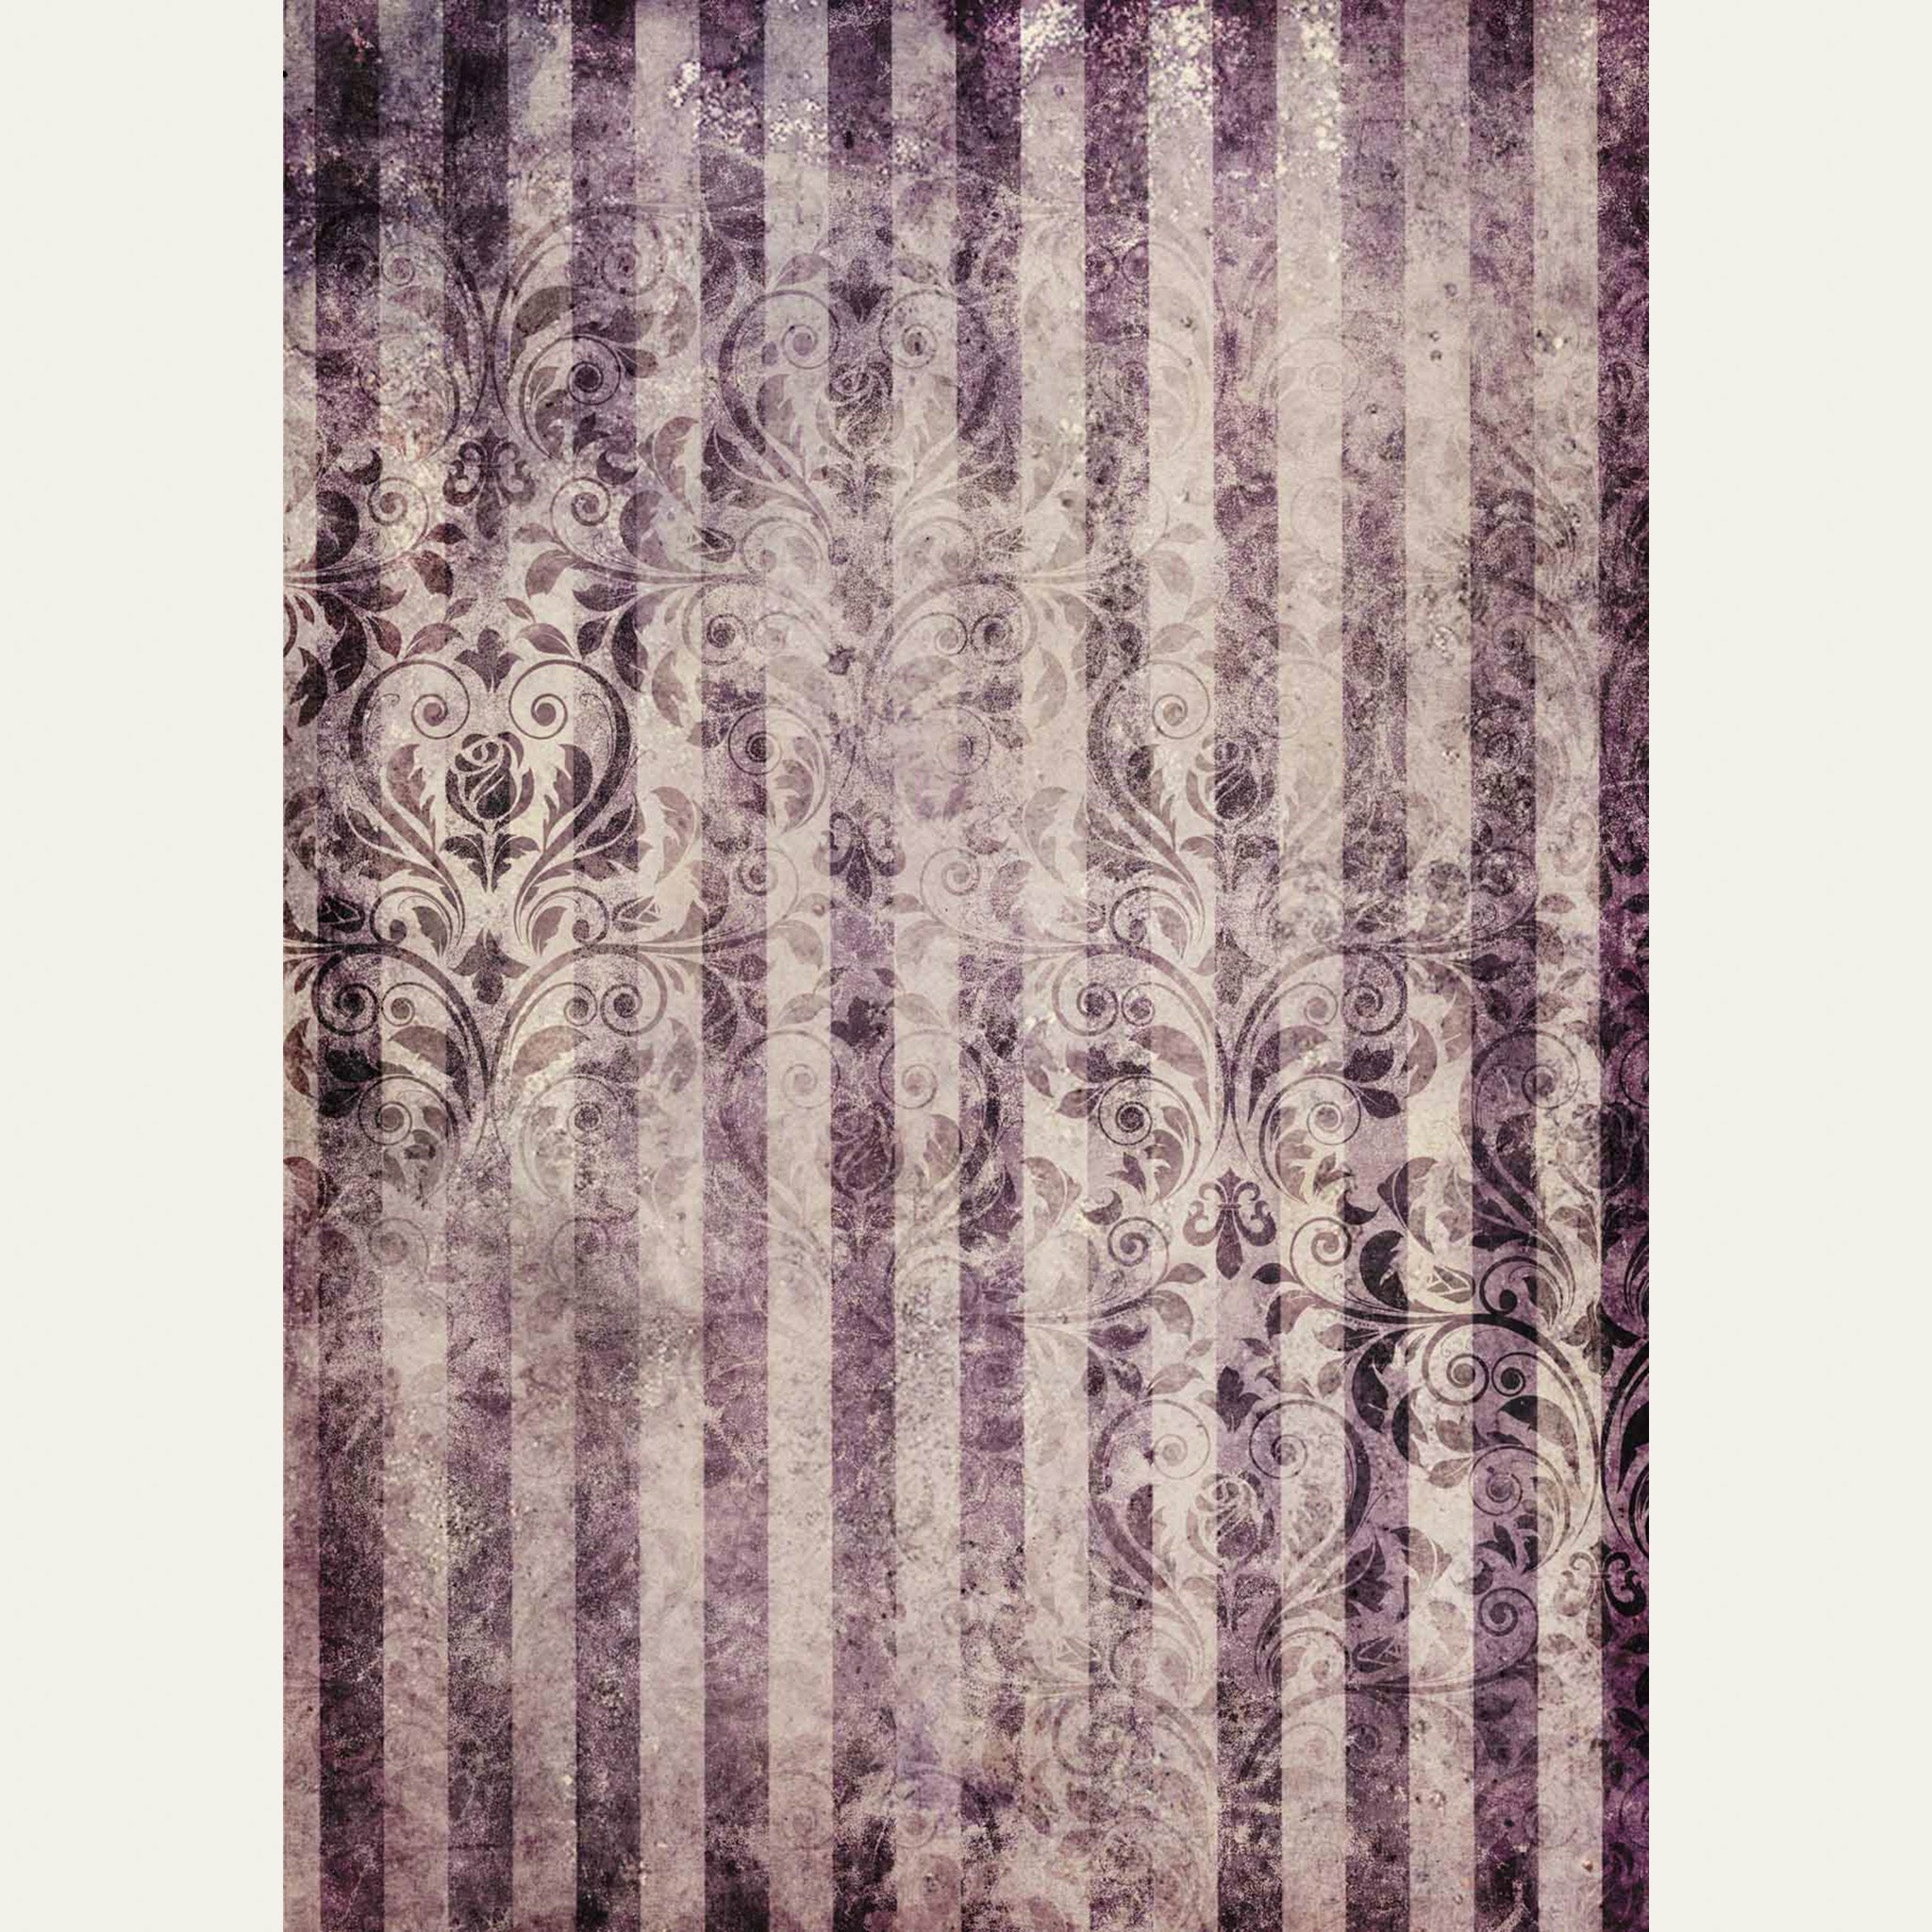 A0 rice paper that features distressed purple stripes with a rose damask overlay. White borders are on the sides.